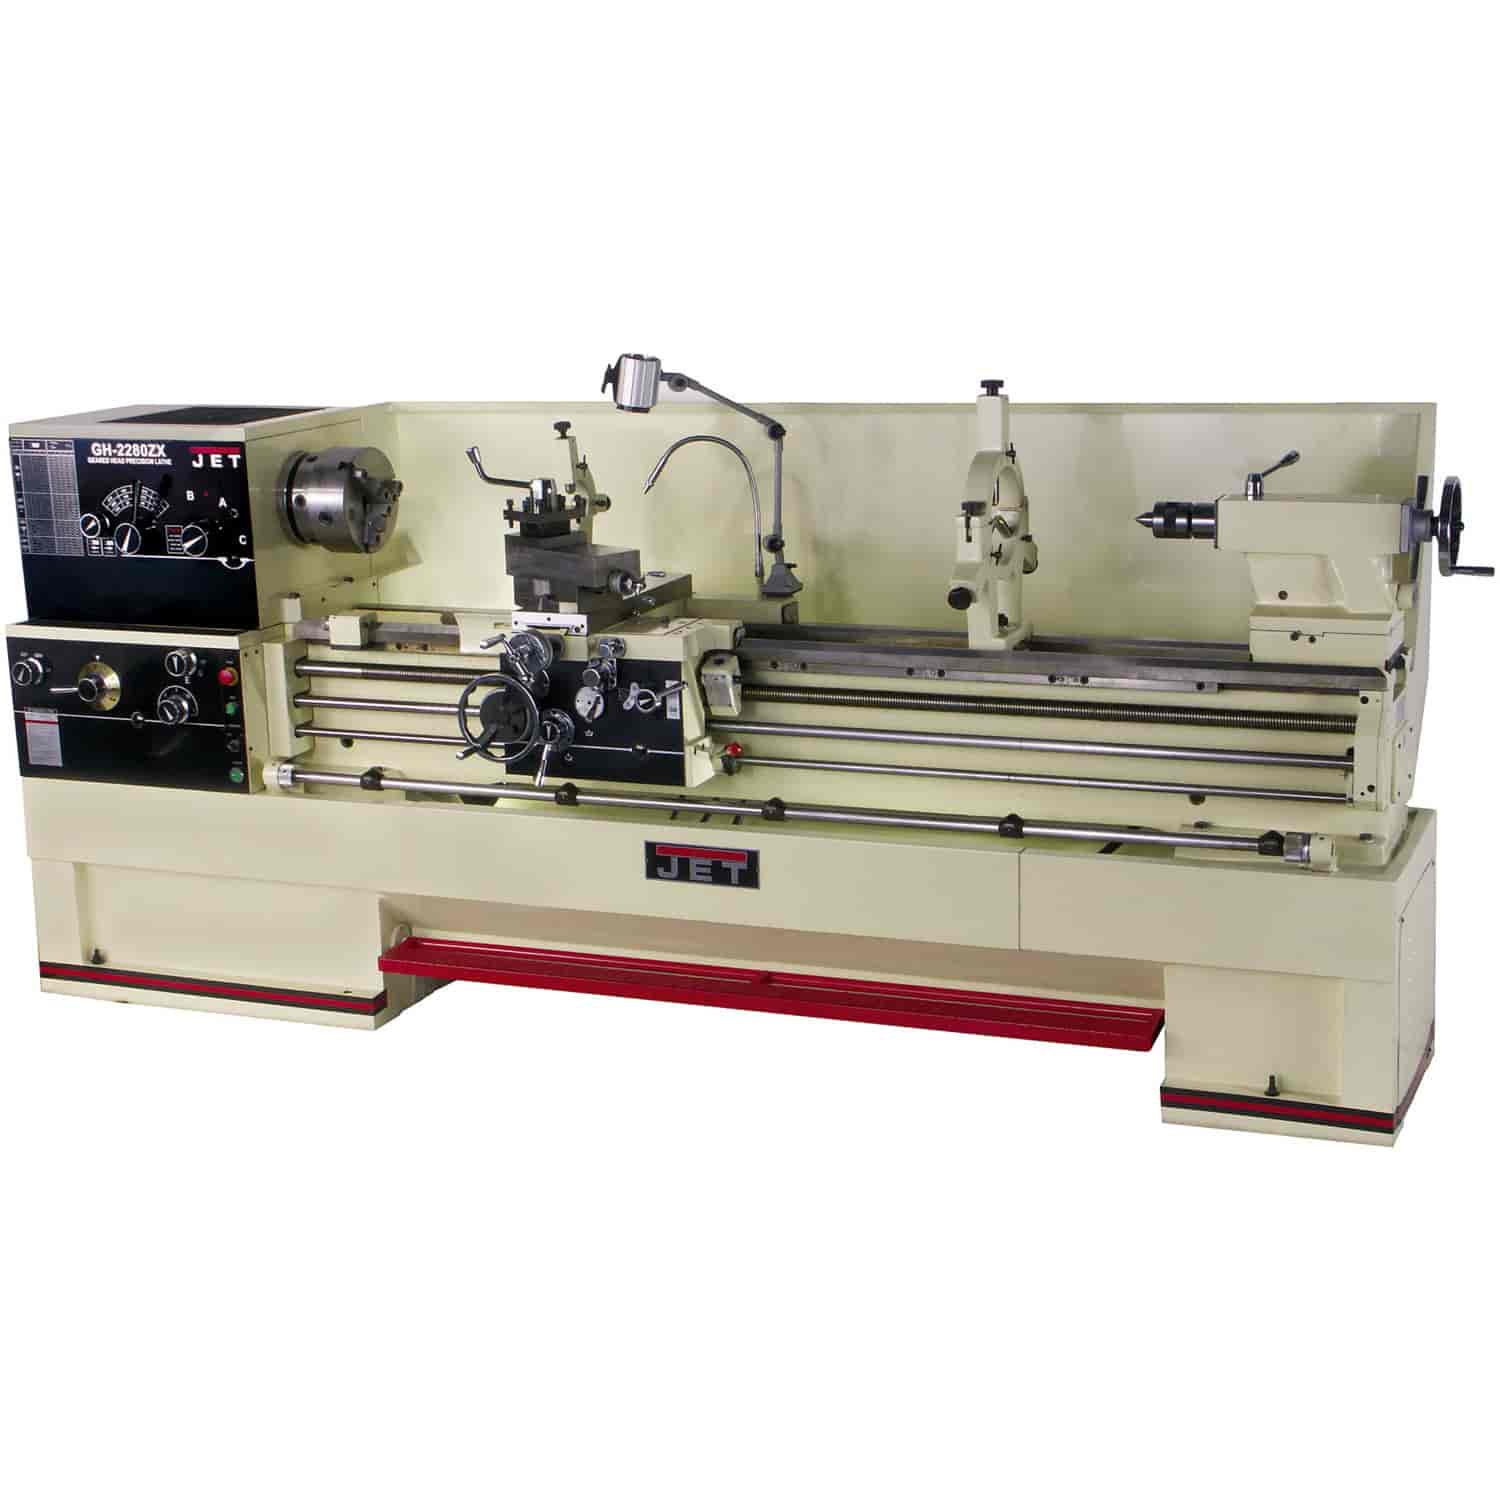 GH-2280ZX 3-1/8 Spindle Bore Geared Head Lathe